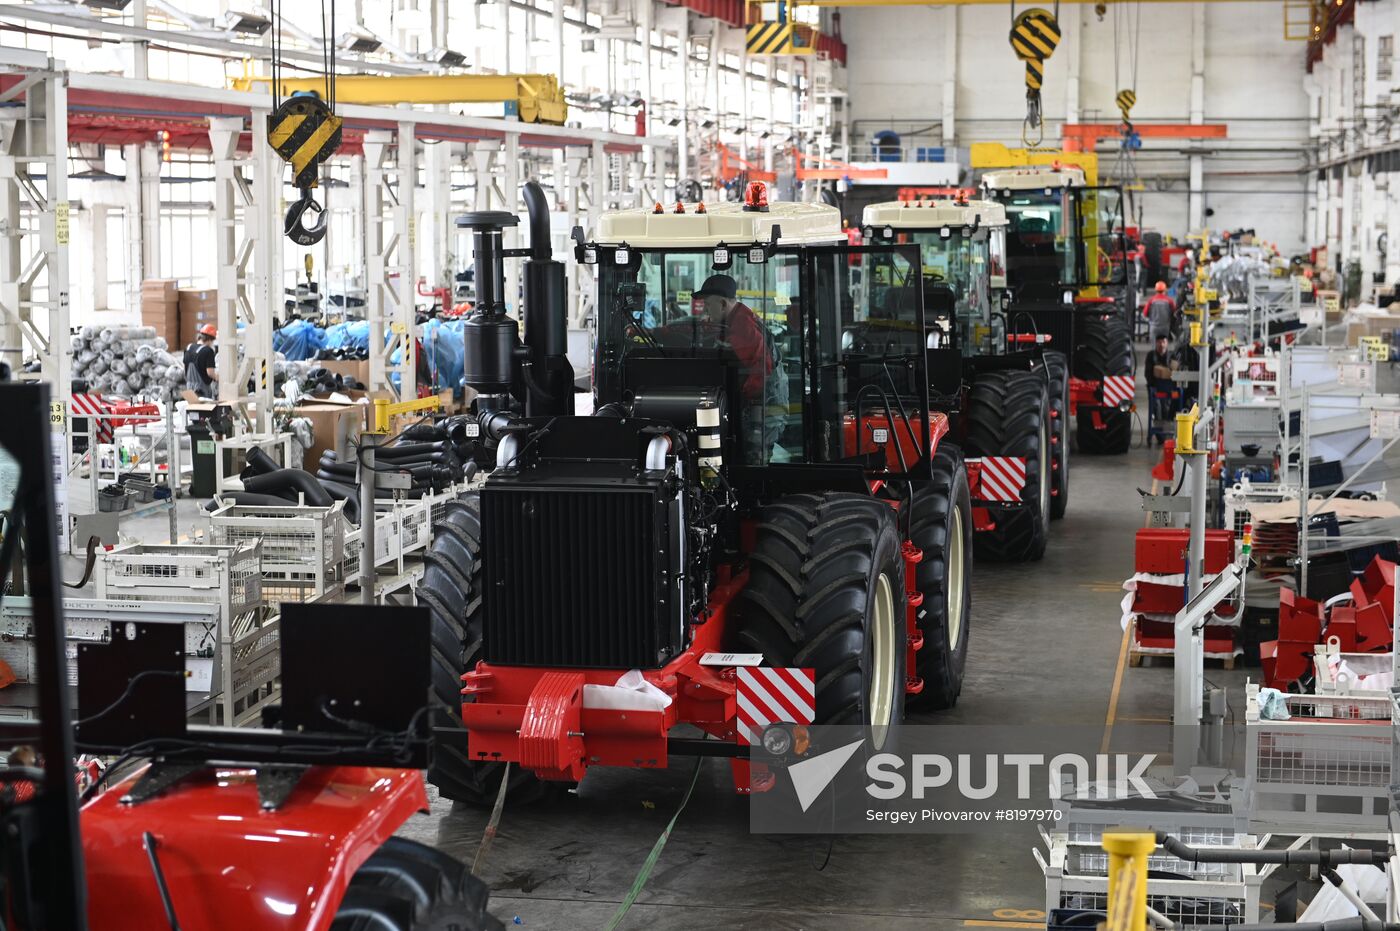 Russia Agricultural Machinery